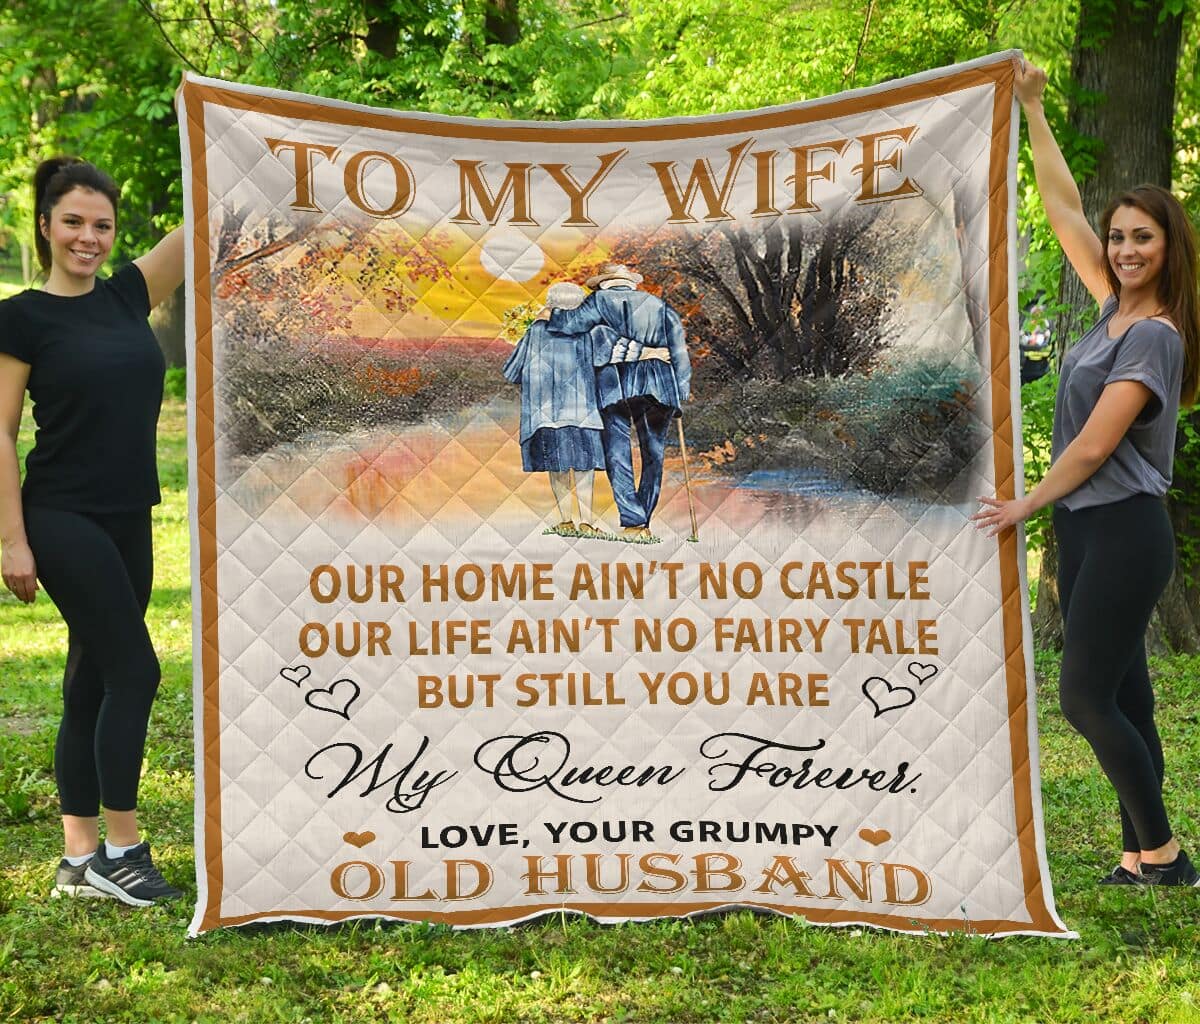 To My Wife - Old Husband Quilt